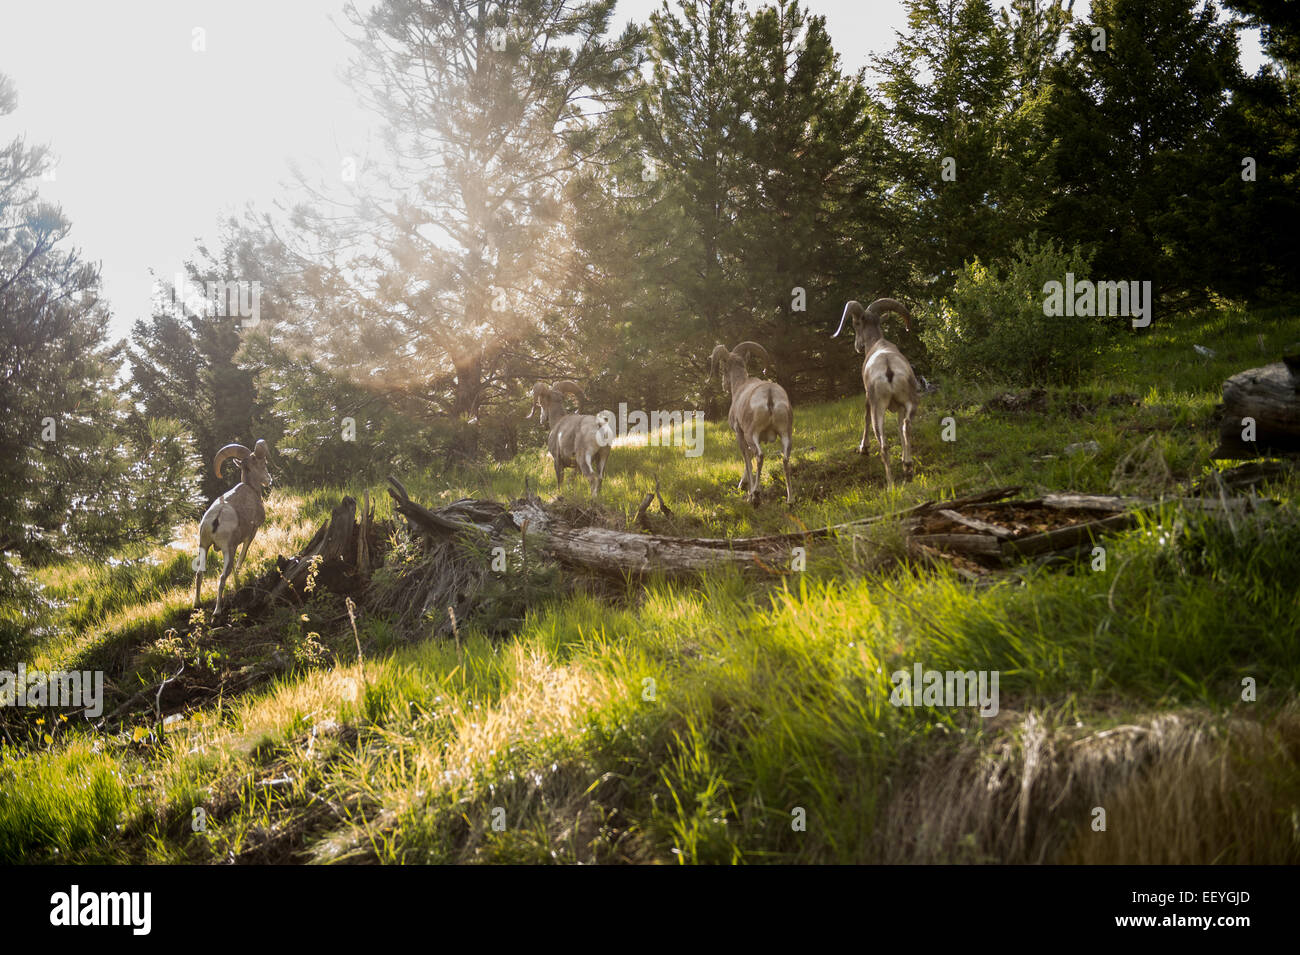 Bighorn sheep graze near the Gird Point Lookout on top of a mountain peak in the Bitterroot National Forest near Hamilton, Montana, June 19, 2014. A 30-inch catwalk surrounding the glass-paneled room offers unobstructed views of the surrounding Sapphire, Bitterroot and Anaconda-Pintler mountain ranges. (Photo by Ami Vitale) Stock Photo